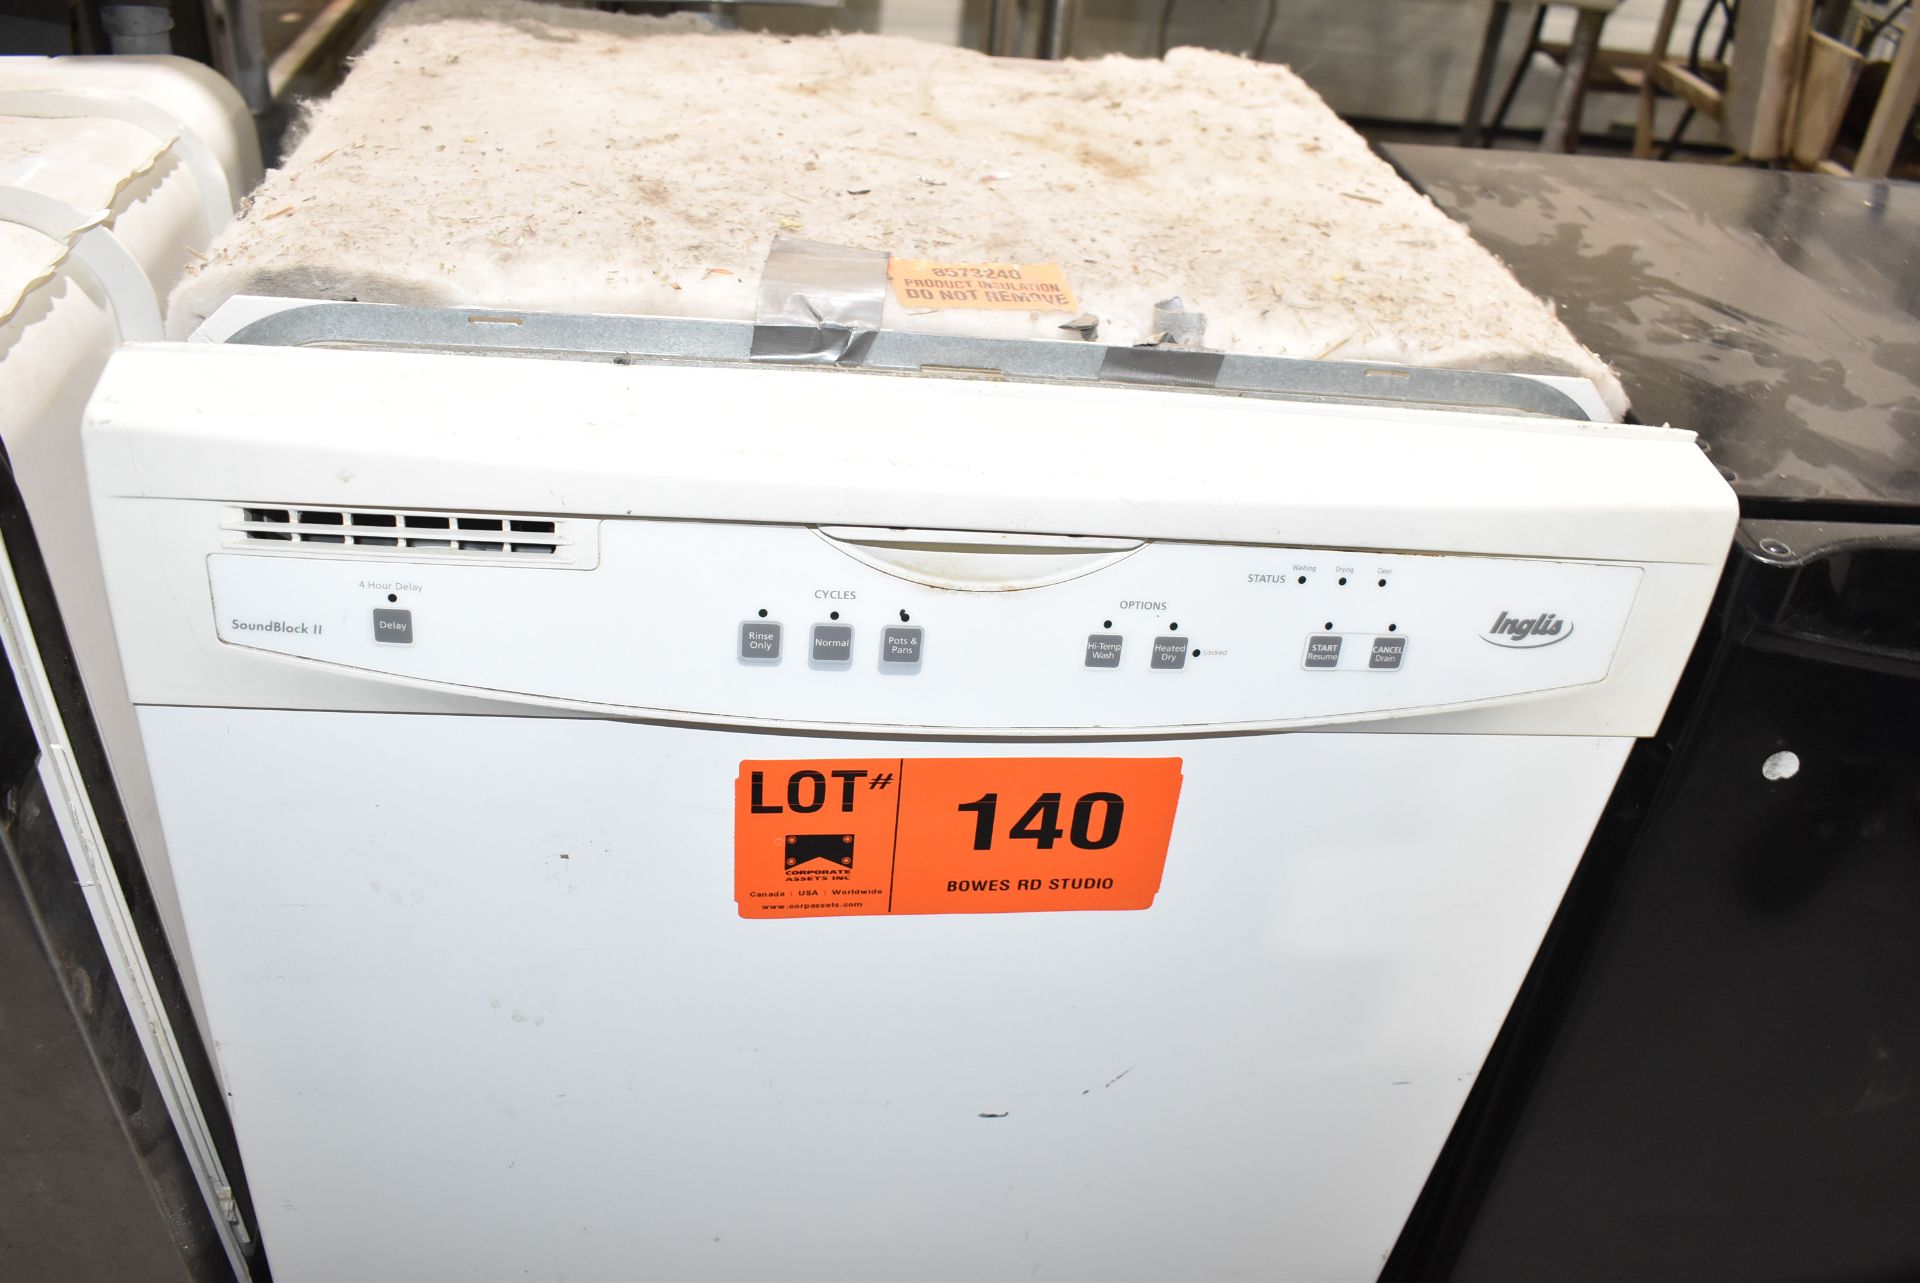 INGLIS IWU98661 DISHWASHER, S/N F00302848 [RIGGING FEES FOR LOT #140 - $25 CAD PLUS APPLICABLE - Image 2 of 3